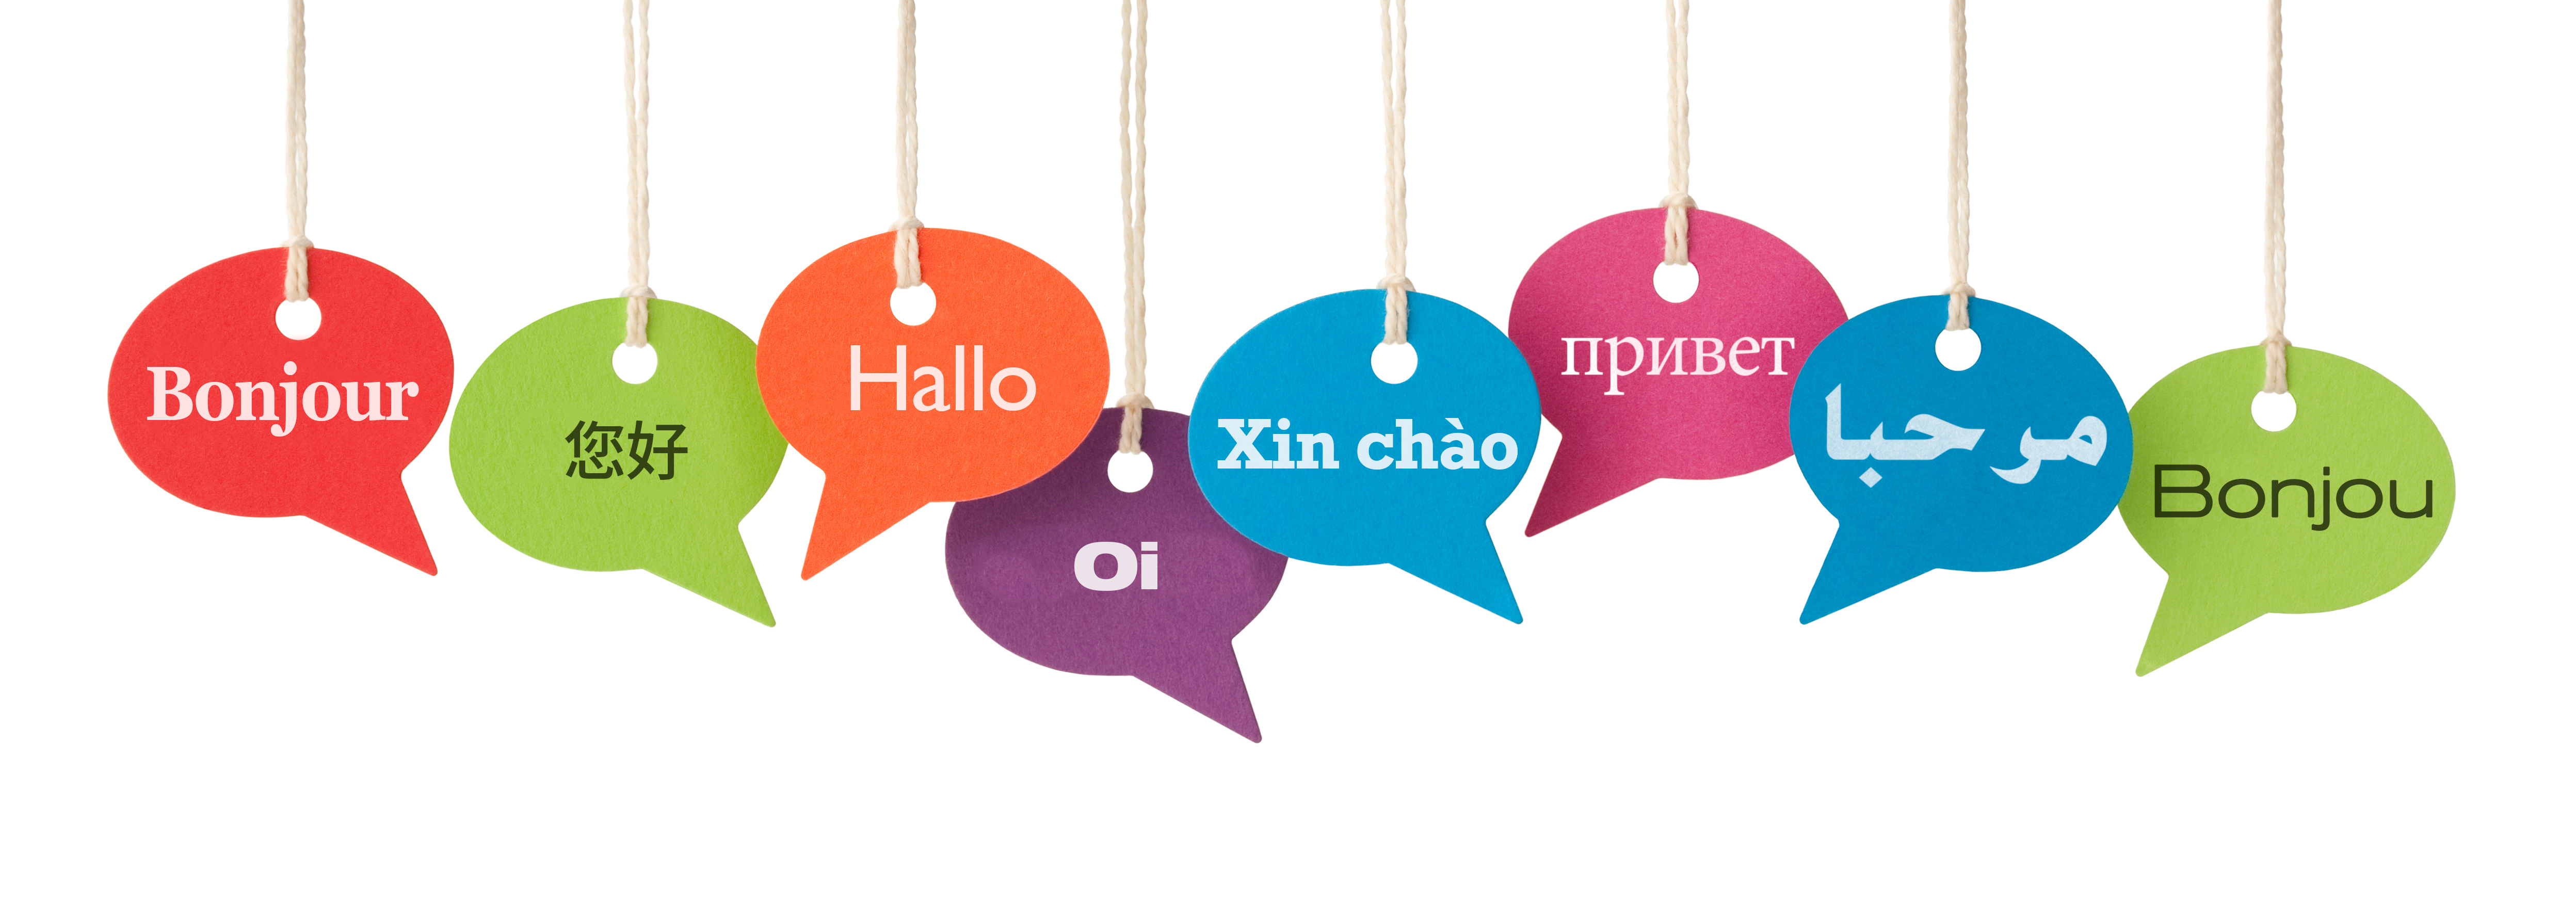 Speech bubbles contain the word HELLO in eight different languages. French, Chinese, German, Portuguese Br, Vietnamese, Russian, Arabic and Haitian Creole.